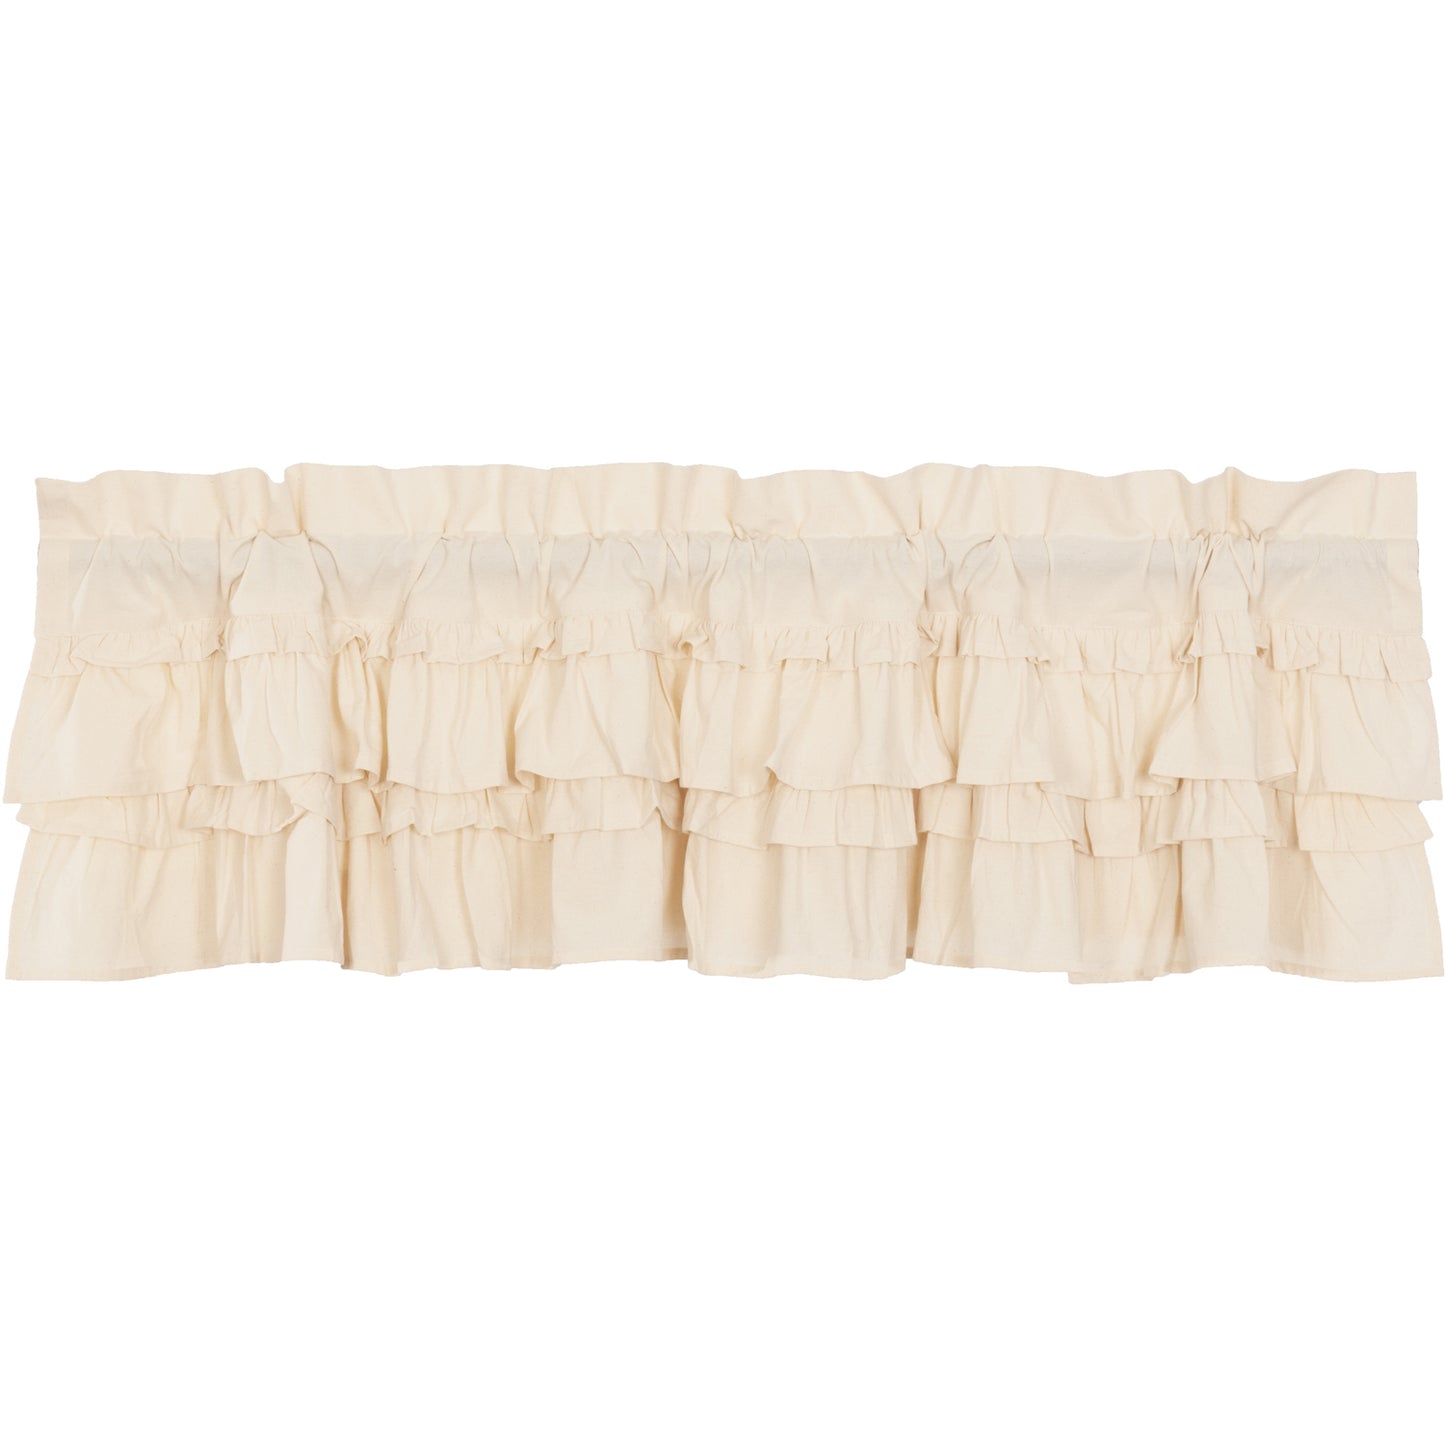 51991-Muslin-Ruffled-Unbleached-Natural-Valance-16x60-image-6